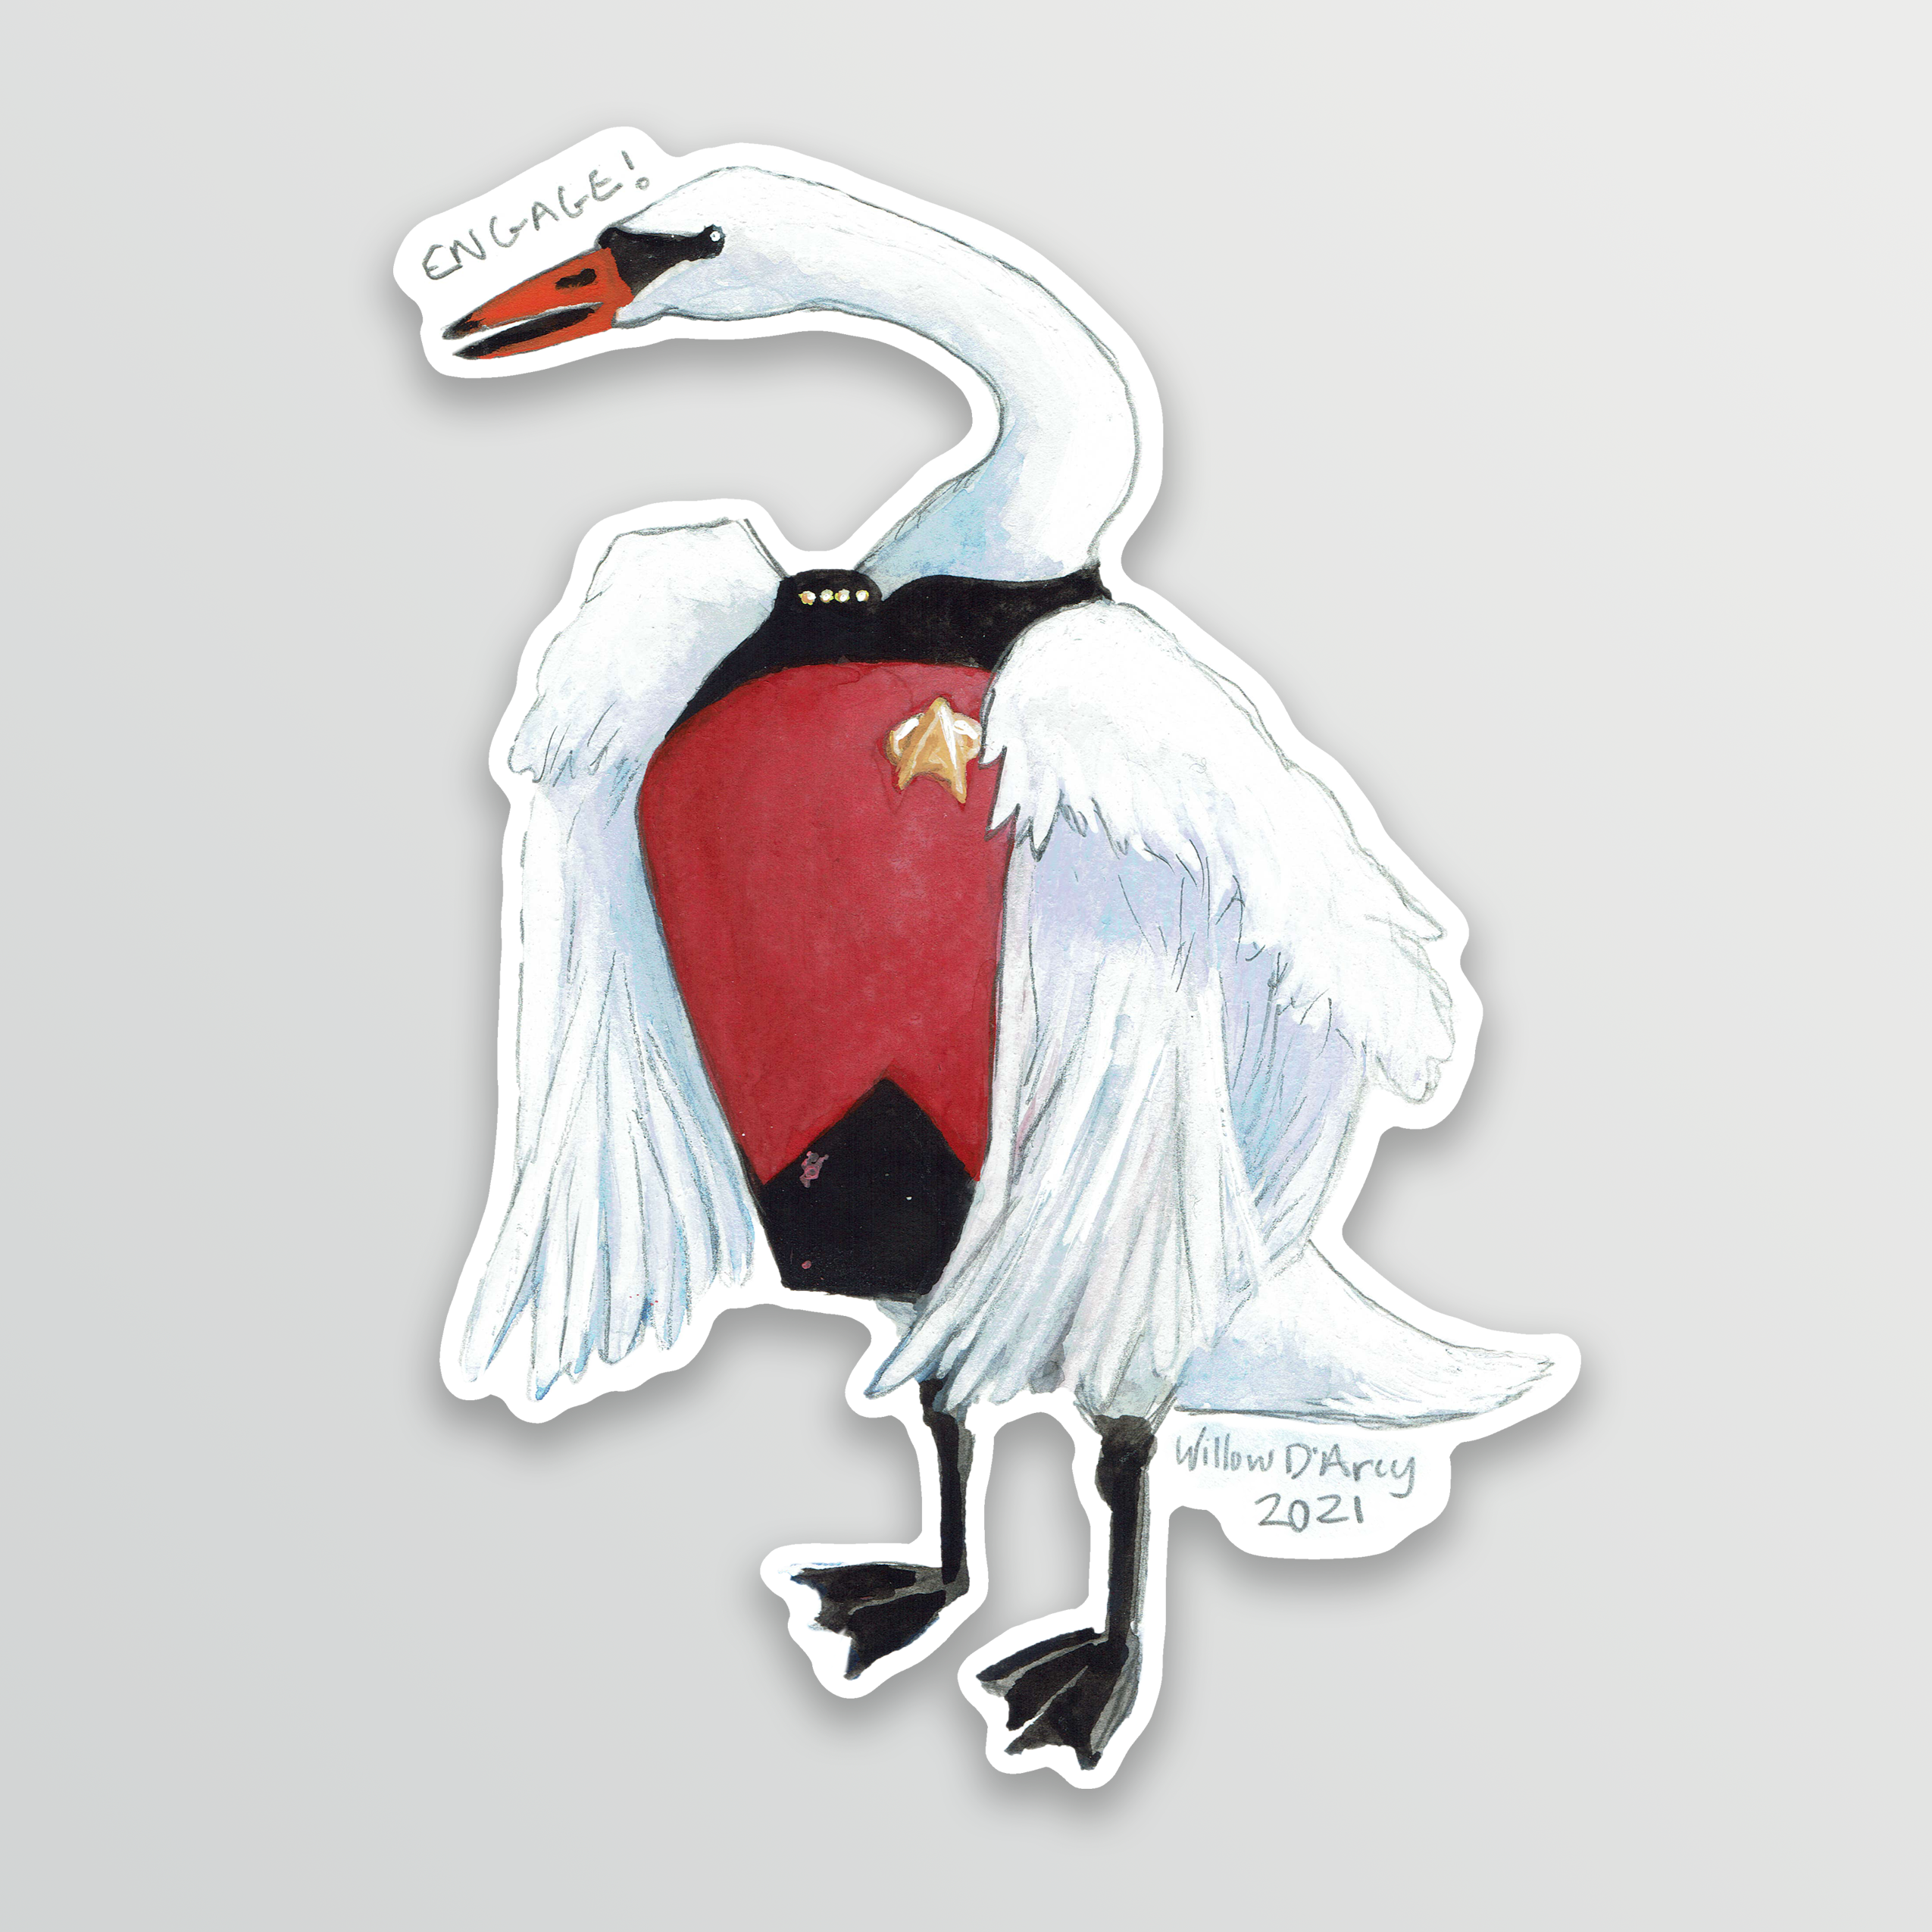 Sticker of an illustration of a swan wearing a science fiction character costume and saying “Engage!”